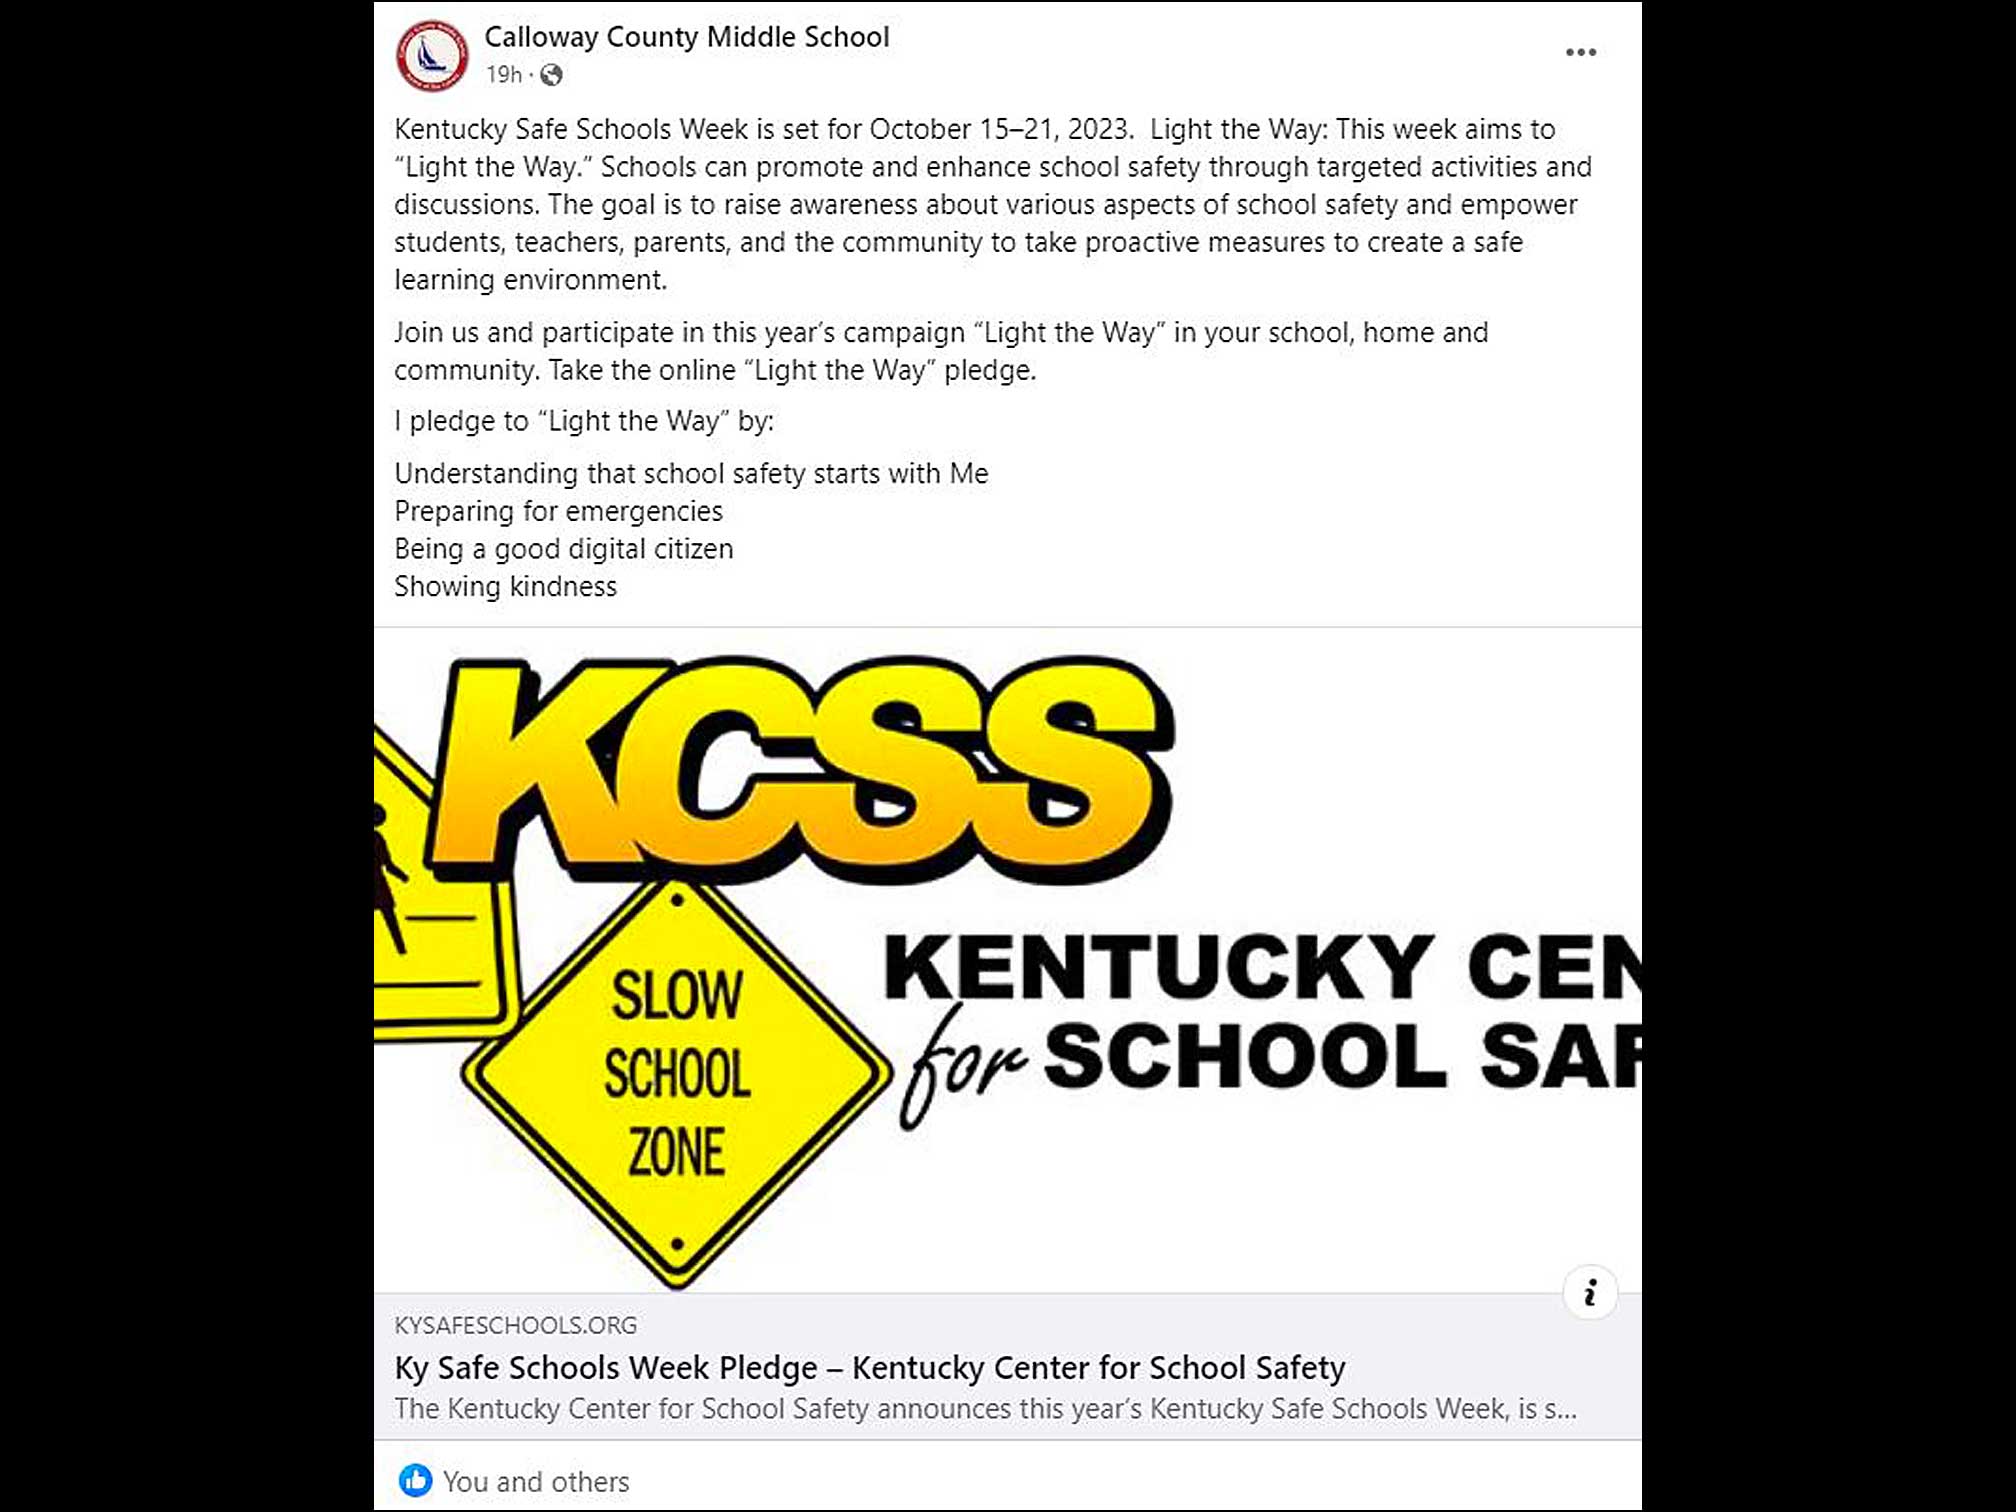 SSW 2023 Photo Highlights Image Calloway County School District Middle School Social Media